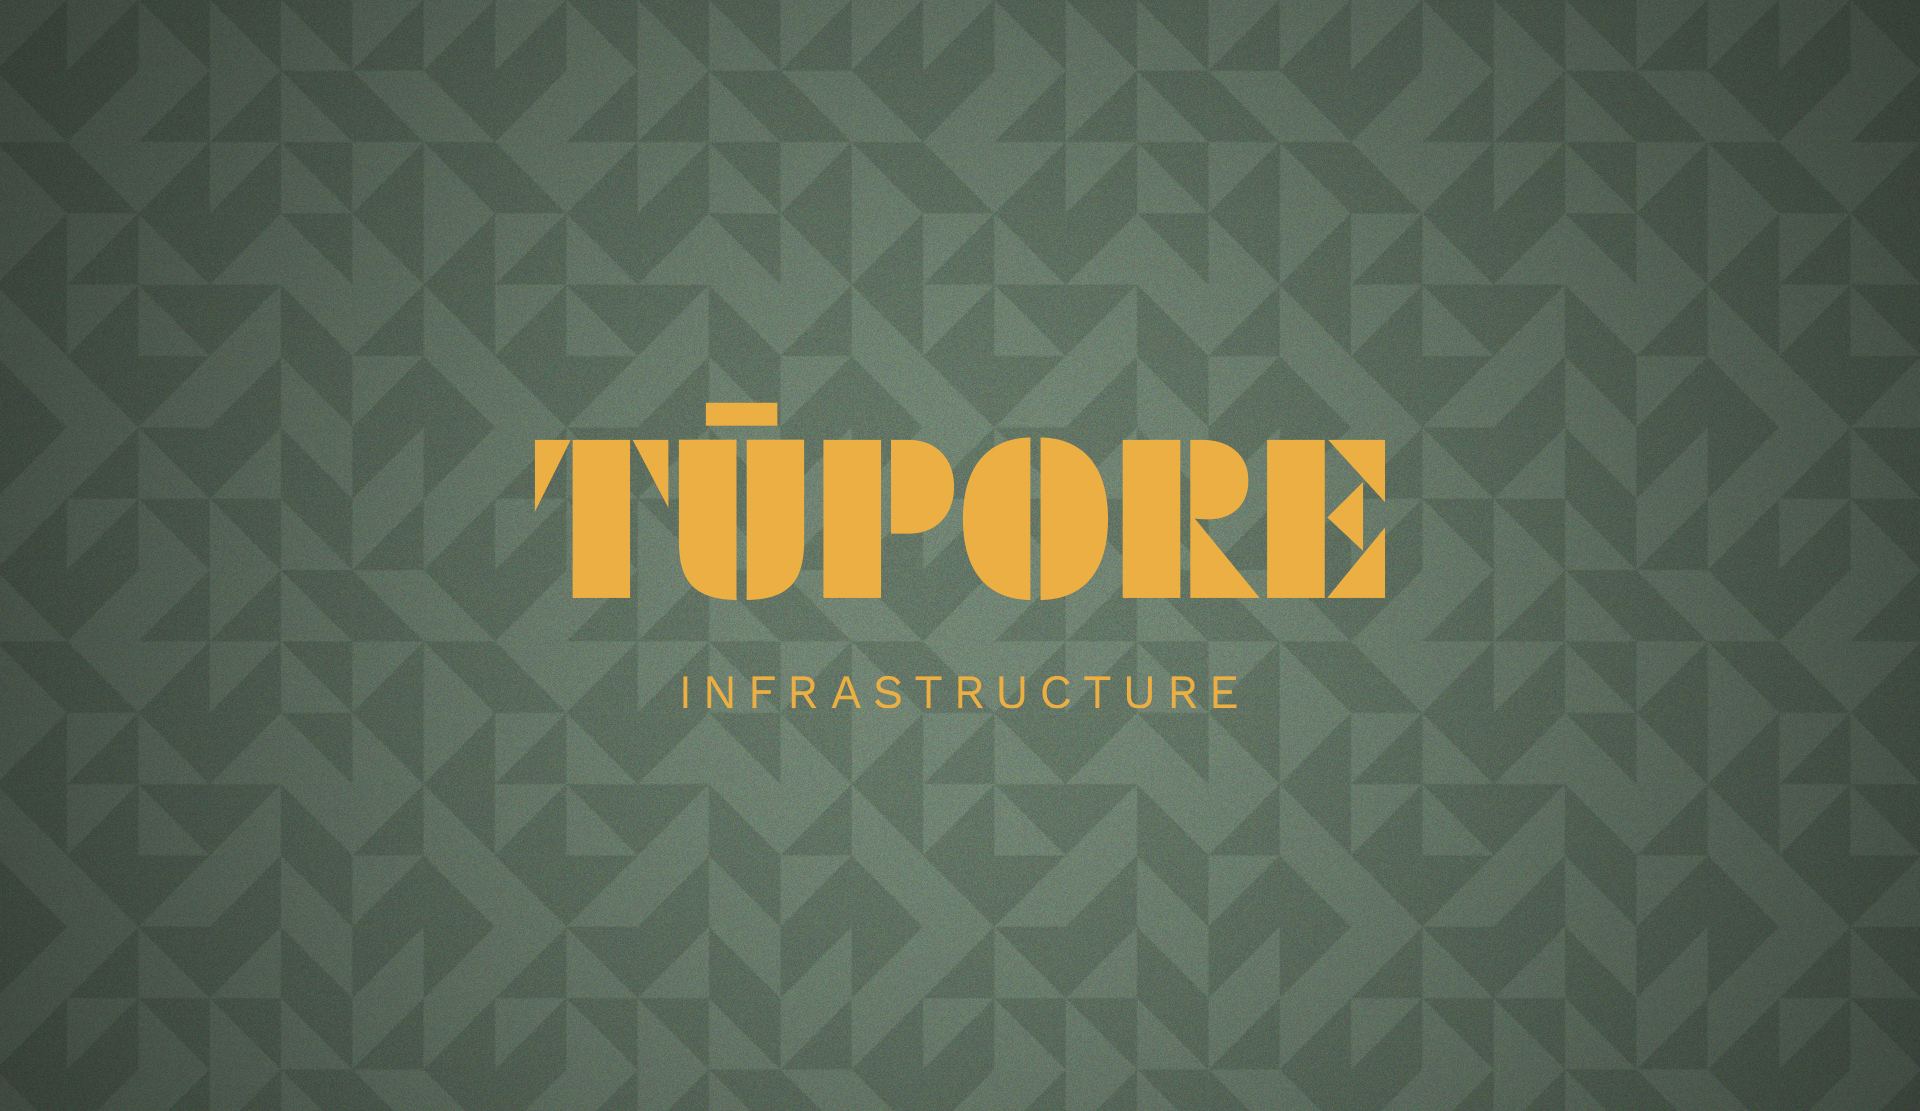 Many-Hats-Tupore-infrastructure-logo-urban-background copy